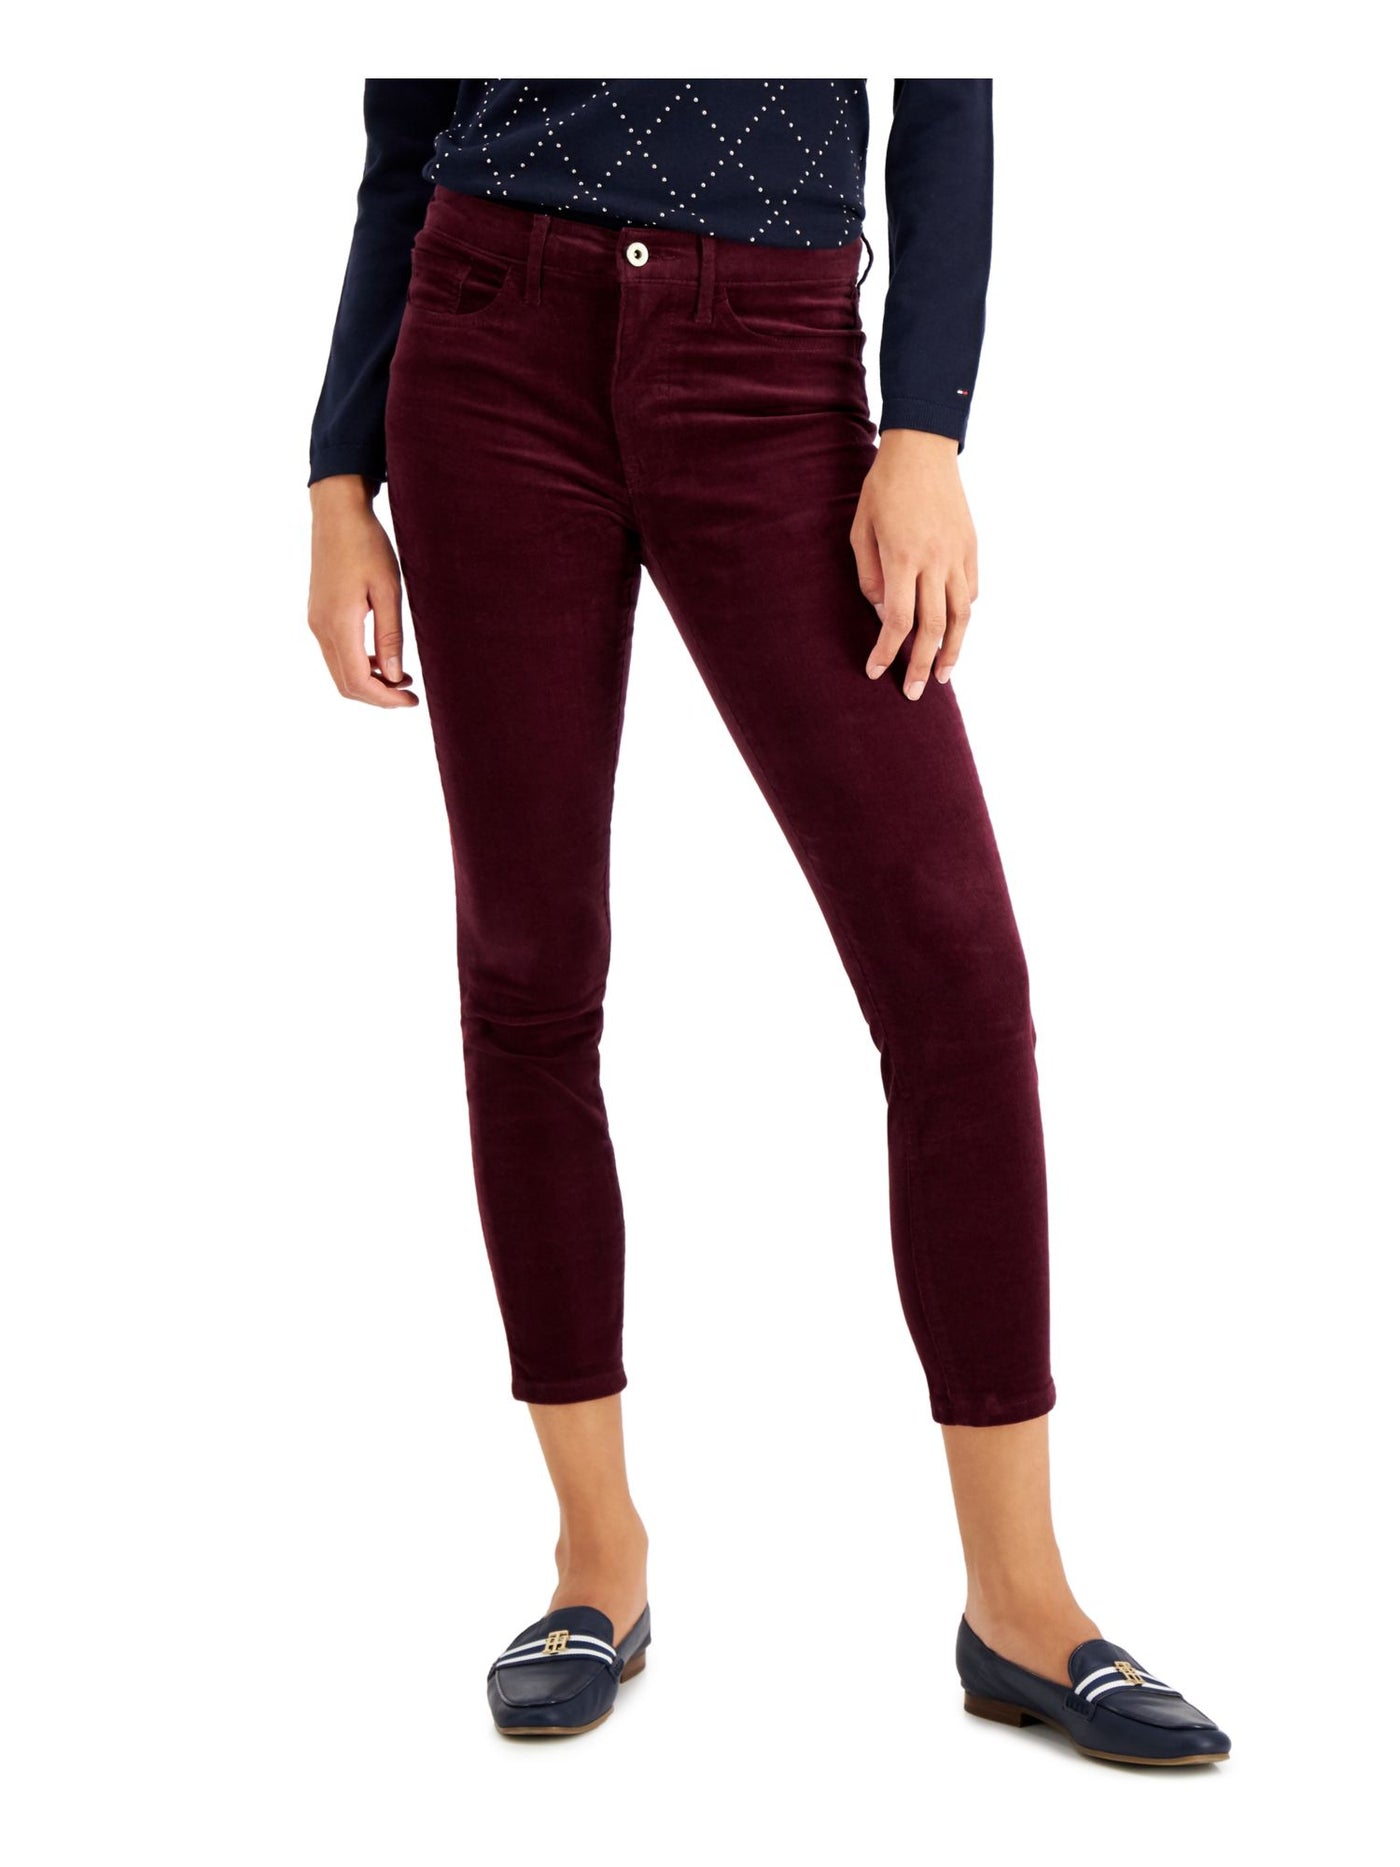 TOMMY HILFIGER Womens Burgundy Zippered Pocketed Button Closure Ankle Skinny Pants 16